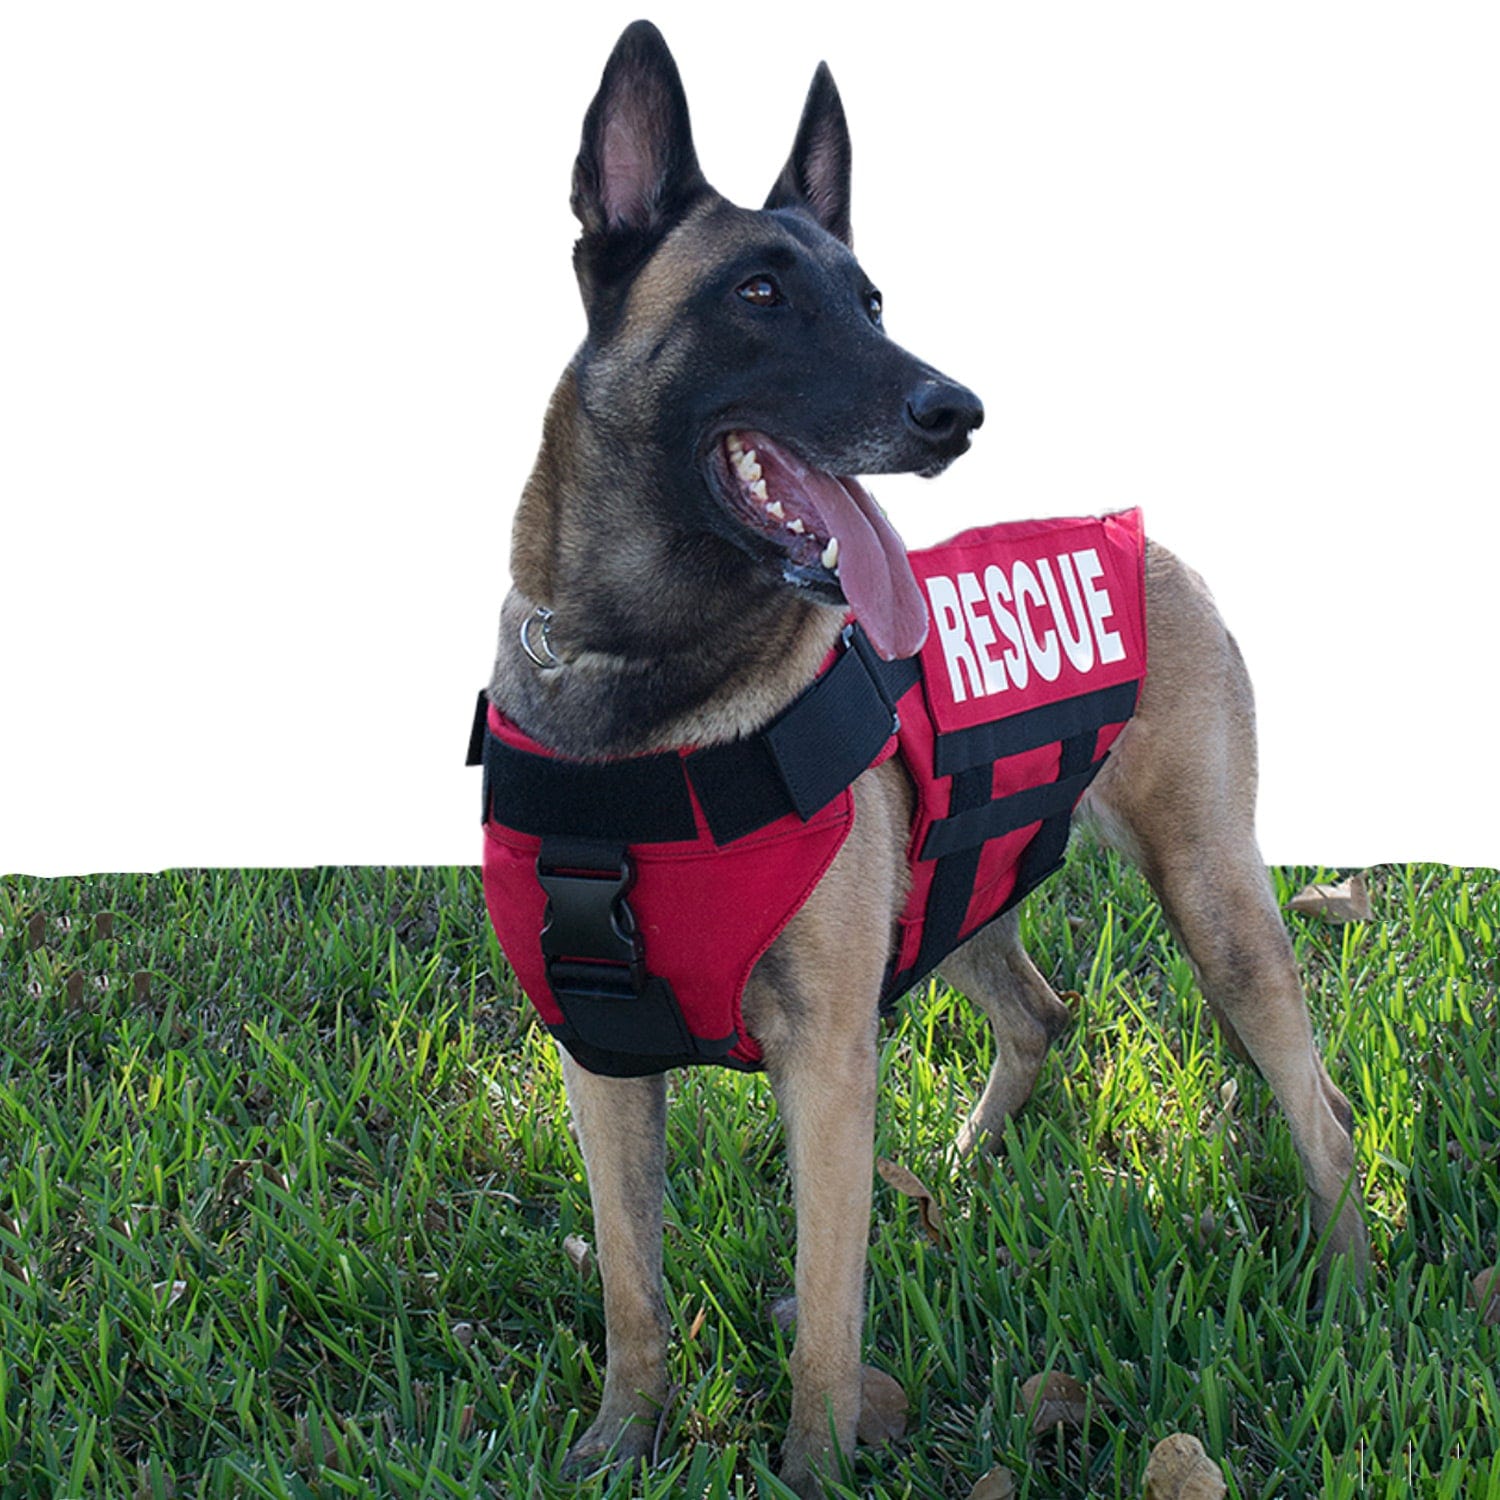 Are Service Animals Required to Wear a Vest, Patch, or Other Gear?